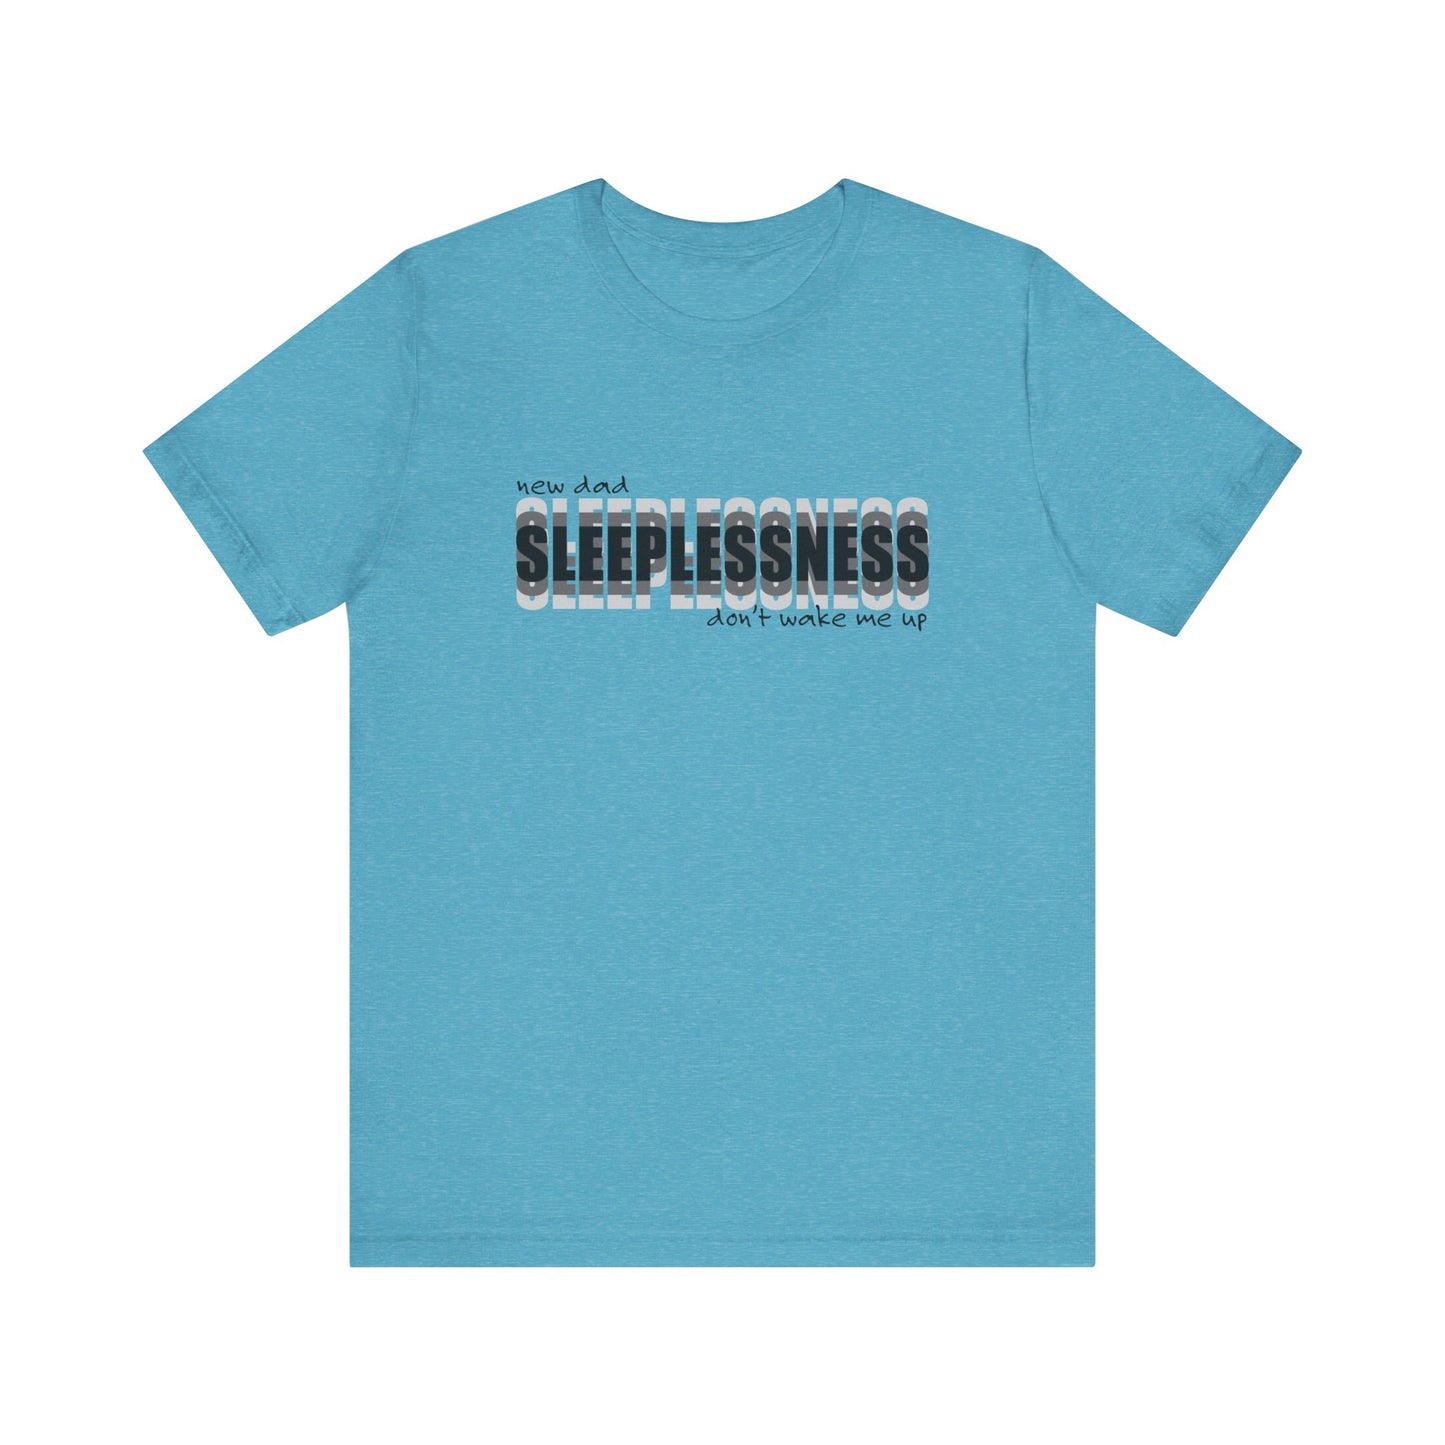 Sleeplessness shirt, New Dad Shirt, Father's Day Gift, Gift for New Born Dad, Gift for husband, Funny Dad Tee, First Time Father Shirt